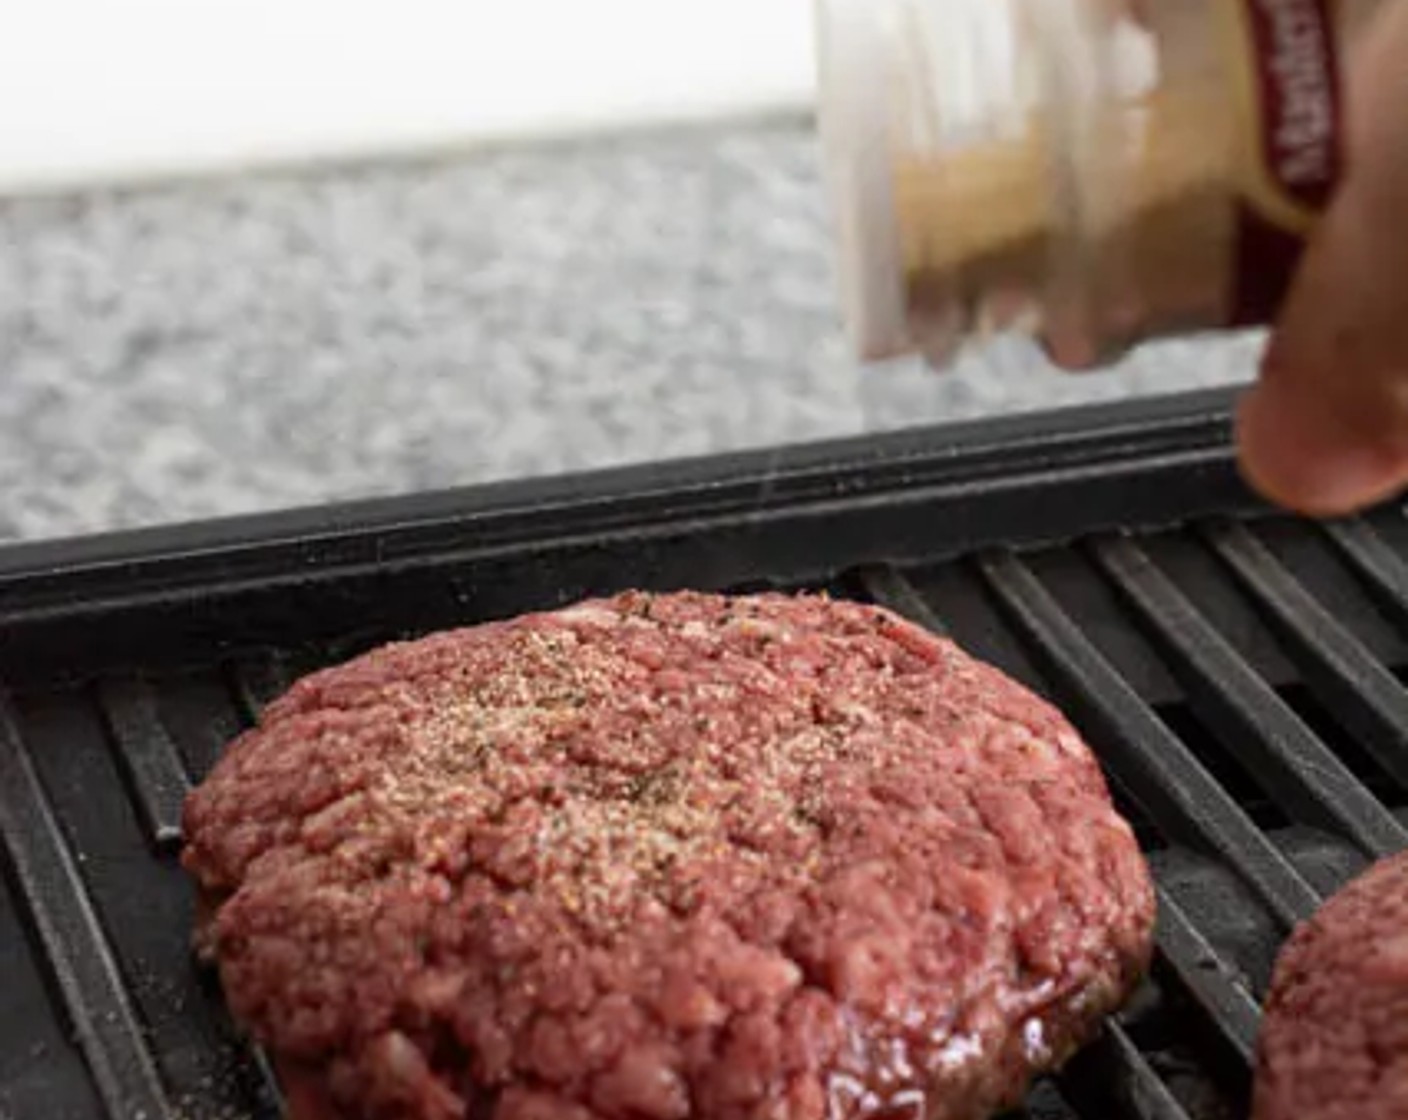 step 3 Season the Ground Beef (1 lb) generously with Salt (to taste), Ground Black Pepper (to taste), and McCormick® Garlic Powder (to taste). Gently place the burger patties on a grill or cast-iron skillet. Allow the burger to sear for about 2 minutes before flipping them over.